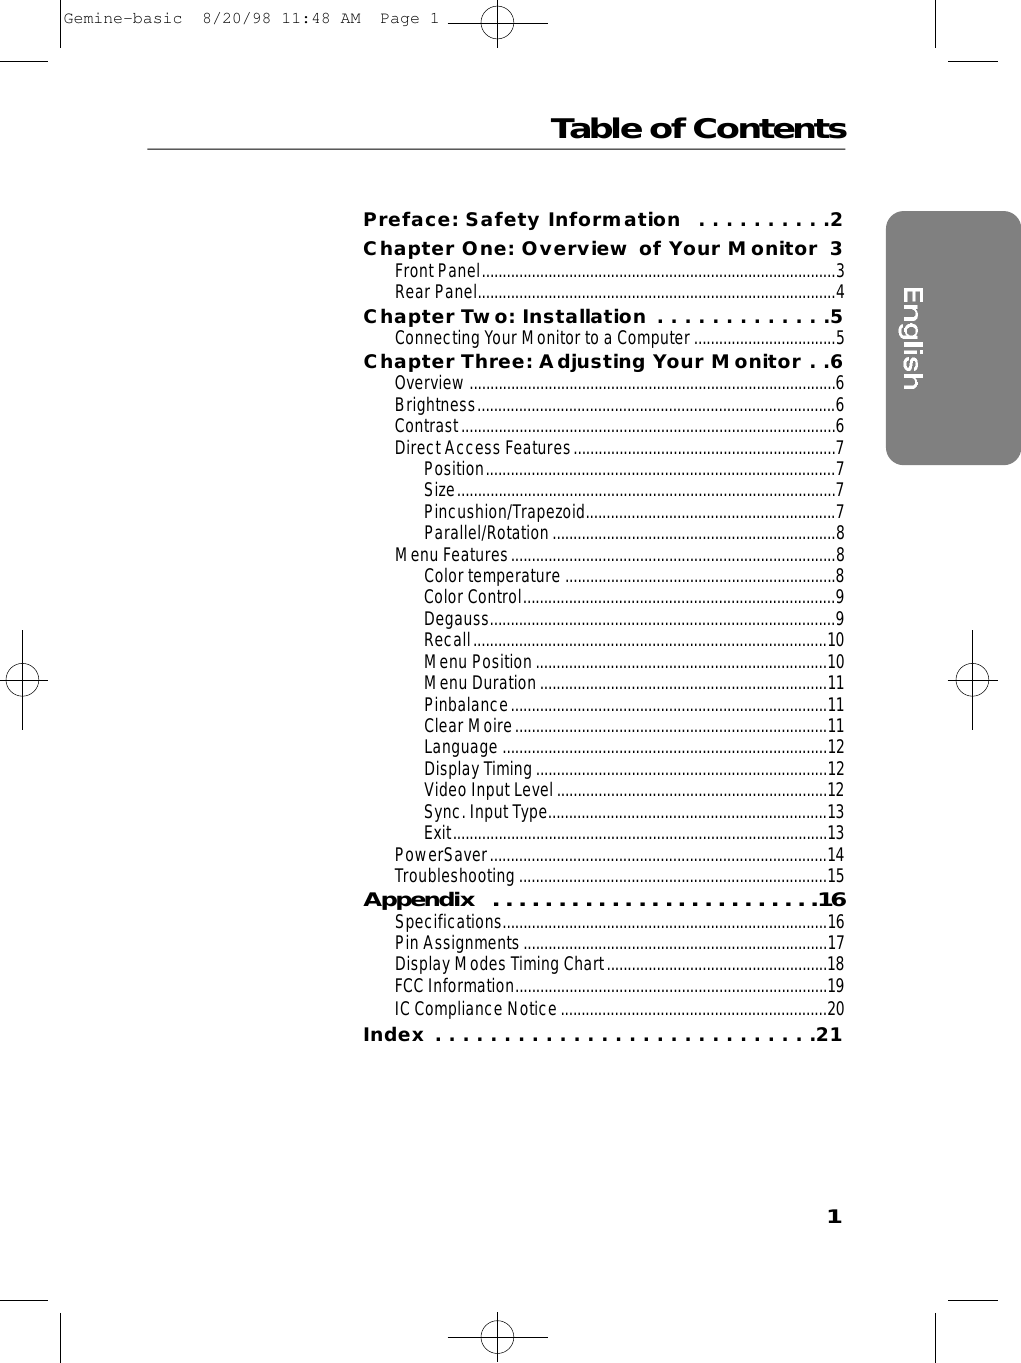 Table of Contents1Preface: Safety Information  . . . . . . . . . .2Chapter One: Overview of Your Monitor 3Front Panel.....................................................................................3Rear Panel......................................................................................4Chapter Two: Installation . . . . . . . . . . . . .5Connecting Your Monitor to a Computer..................................5Chapter Three: Adjusting Your Monitor . .6Overview........................................................................................6Brightness......................................................................................6Contrast..........................................................................................6Direct Access Features...............................................................7Position....................................................................................7Size...........................................................................................7Pincushion/Trapezoid............................................................7Parallel/Rotation....................................................................8Menu Features..............................................................................8Color temperature .................................................................8Color Control...........................................................................9Degauss...................................................................................9Recall.....................................................................................10Menu Position......................................................................10Menu Duration.....................................................................11Pinbalance............................................................................11Clear Moire...........................................................................11Language ..............................................................................12Display Timing......................................................................12Video Input Level.................................................................12Sync. Input Type...................................................................13Exit..........................................................................................13PowerSaver.................................................................................14Troubleshooting..........................................................................15A p p e n d i x  . . . . . . . . . . . . . . . . . . . . . . . . .1 6Specifications..............................................................................16Pin Assignments.........................................................................17Display Modes Timing Chart.....................................................18FCC Information...........................................................................19IC Compliance Notice................................................................20Index . . . . . . . . . . . . . . . . . . . . . . . . . . . .21Gemine-basic  8/20/98 11:48 AM  Page 1